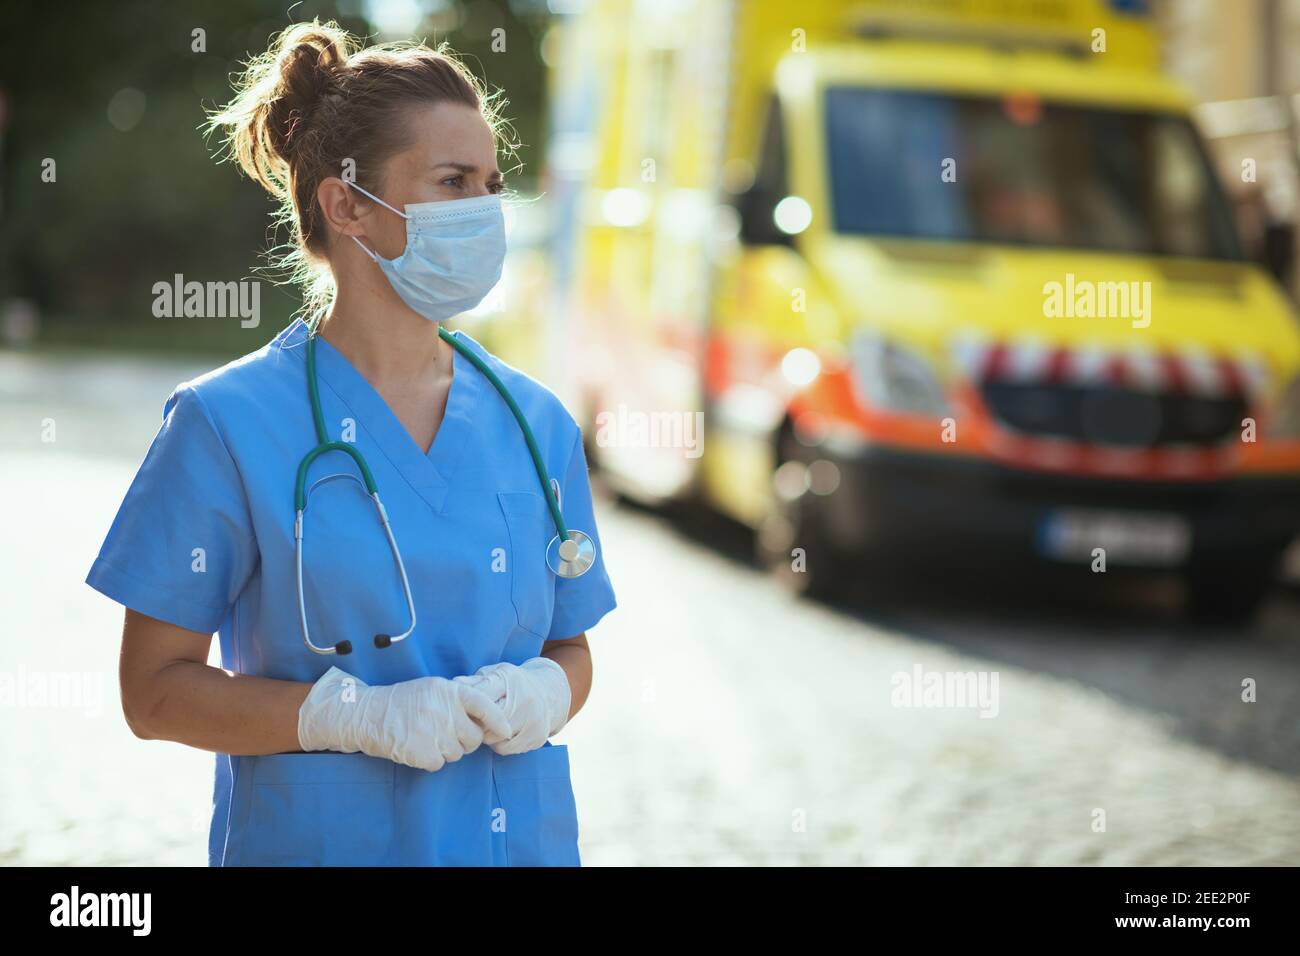 covid-19 pandemic. pensive modern medical doctor woman in uniform with stethoscope and medical mask outdoors near ambulance. Stock Photo